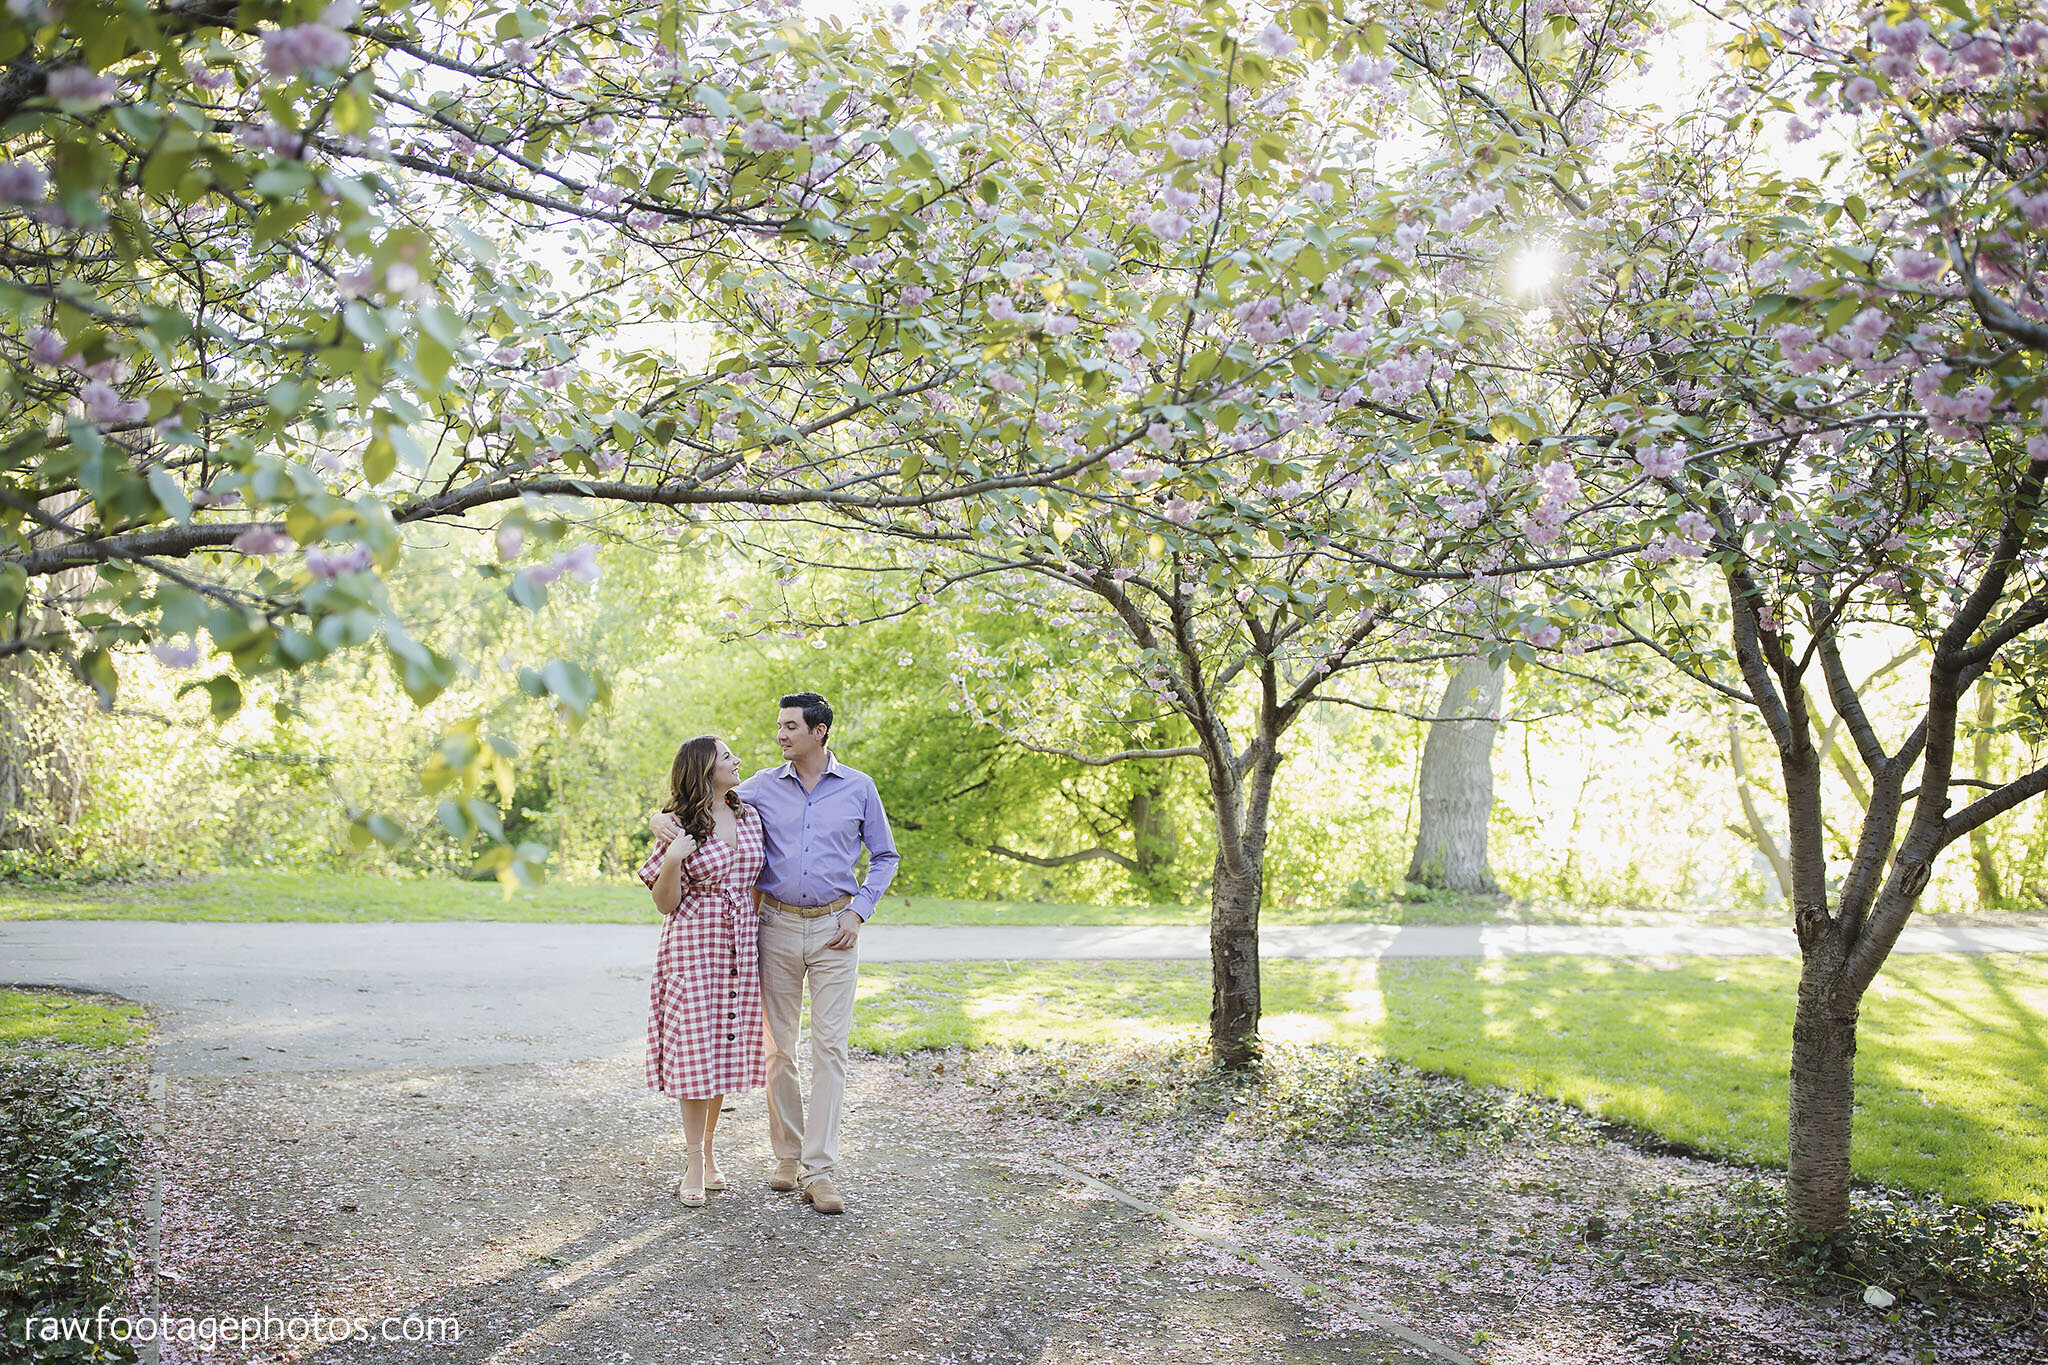 london_ontario_wedding_photographer-raw_footage_photography-spring_engagement_session-spring_blossoms-ivey_park_004.jpg